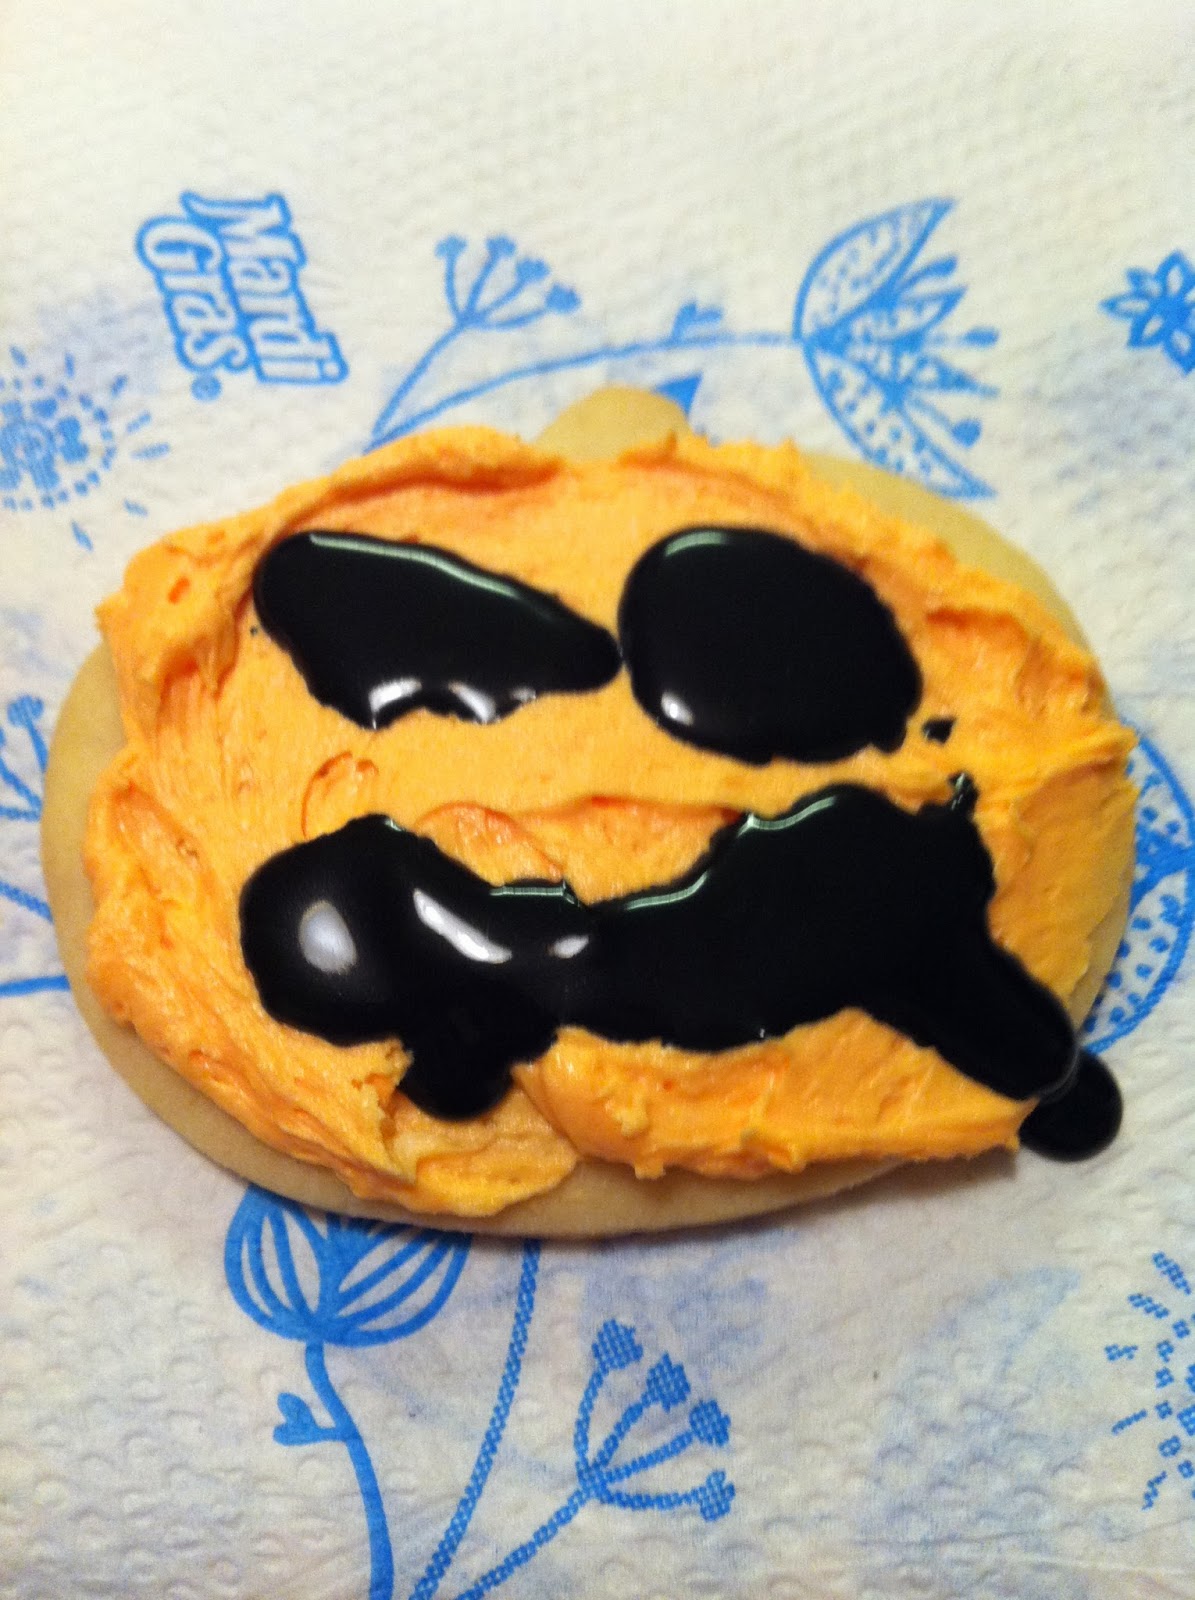 Michelle Martine Merrill S Picture Of The Day Halloween Cookie